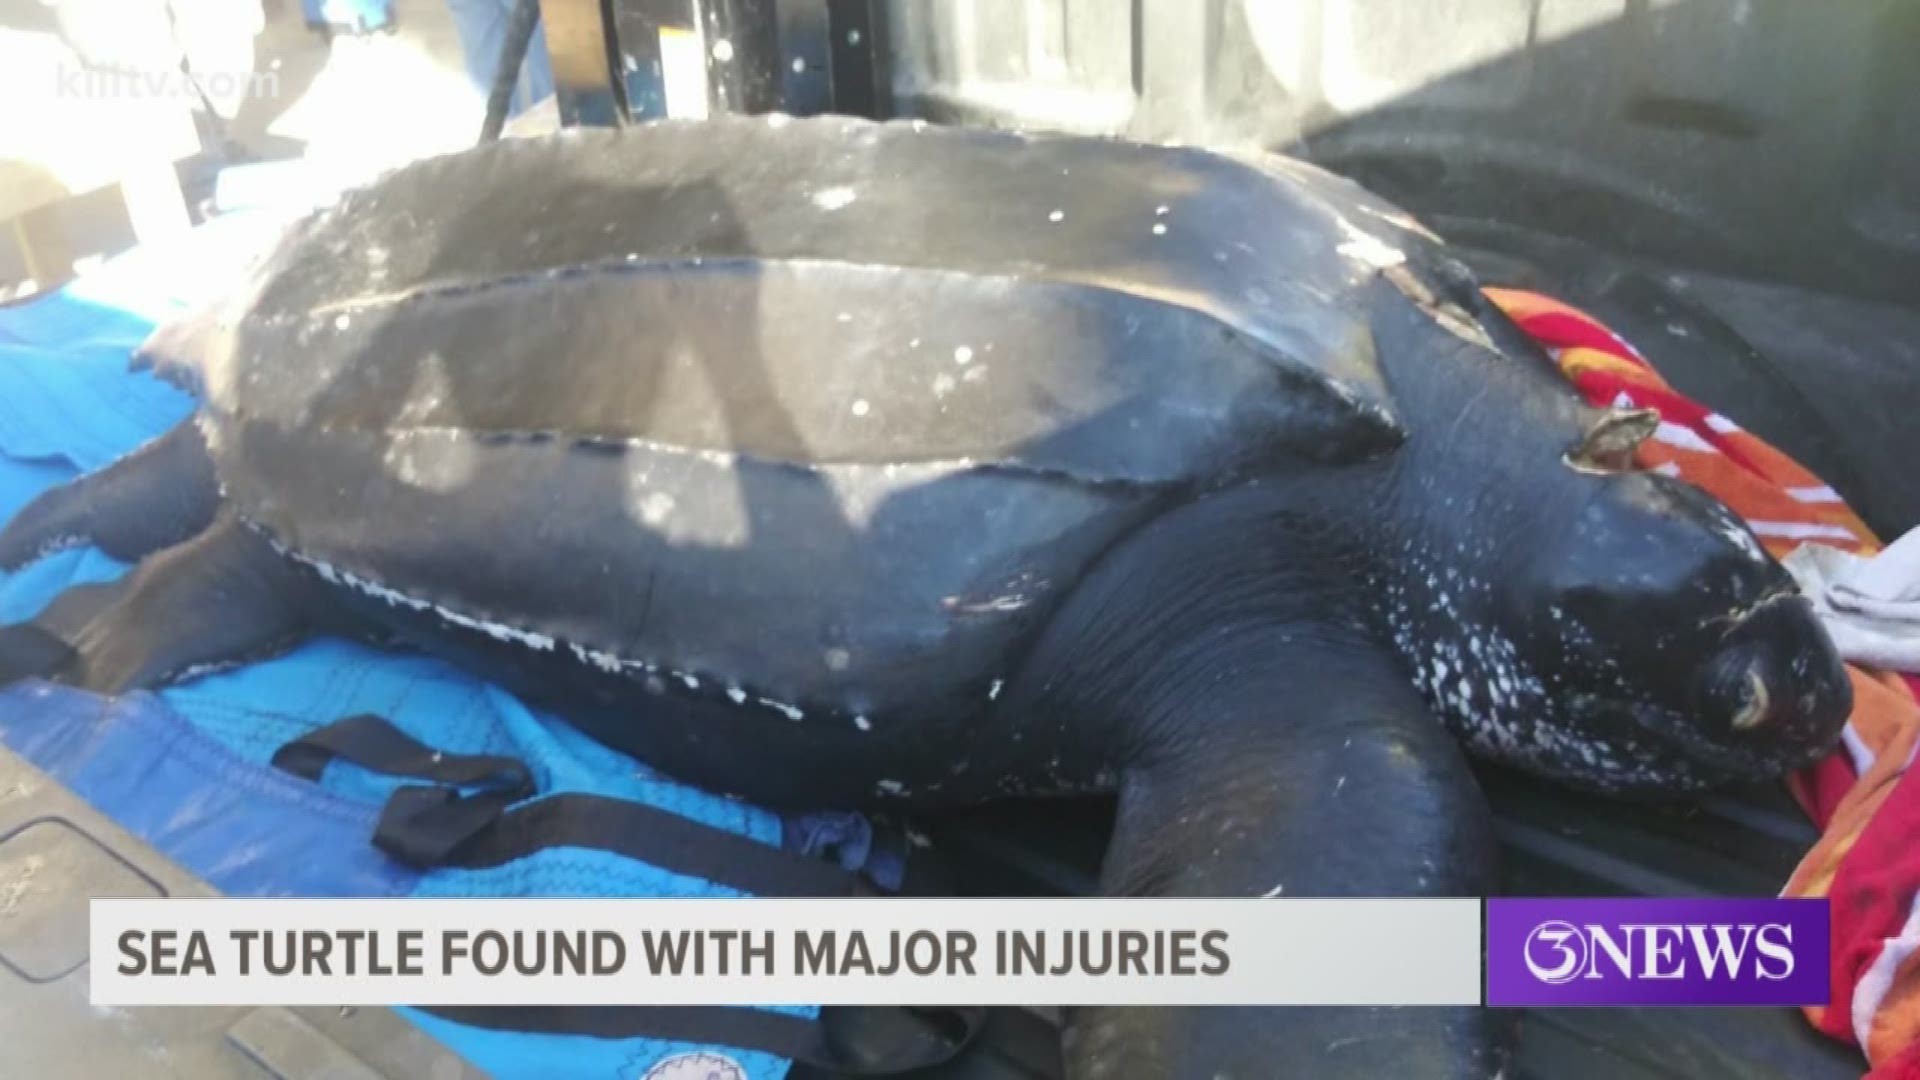 Officials confirmed that it was a leatherback sea turtle that had suffered large propeller wounds.